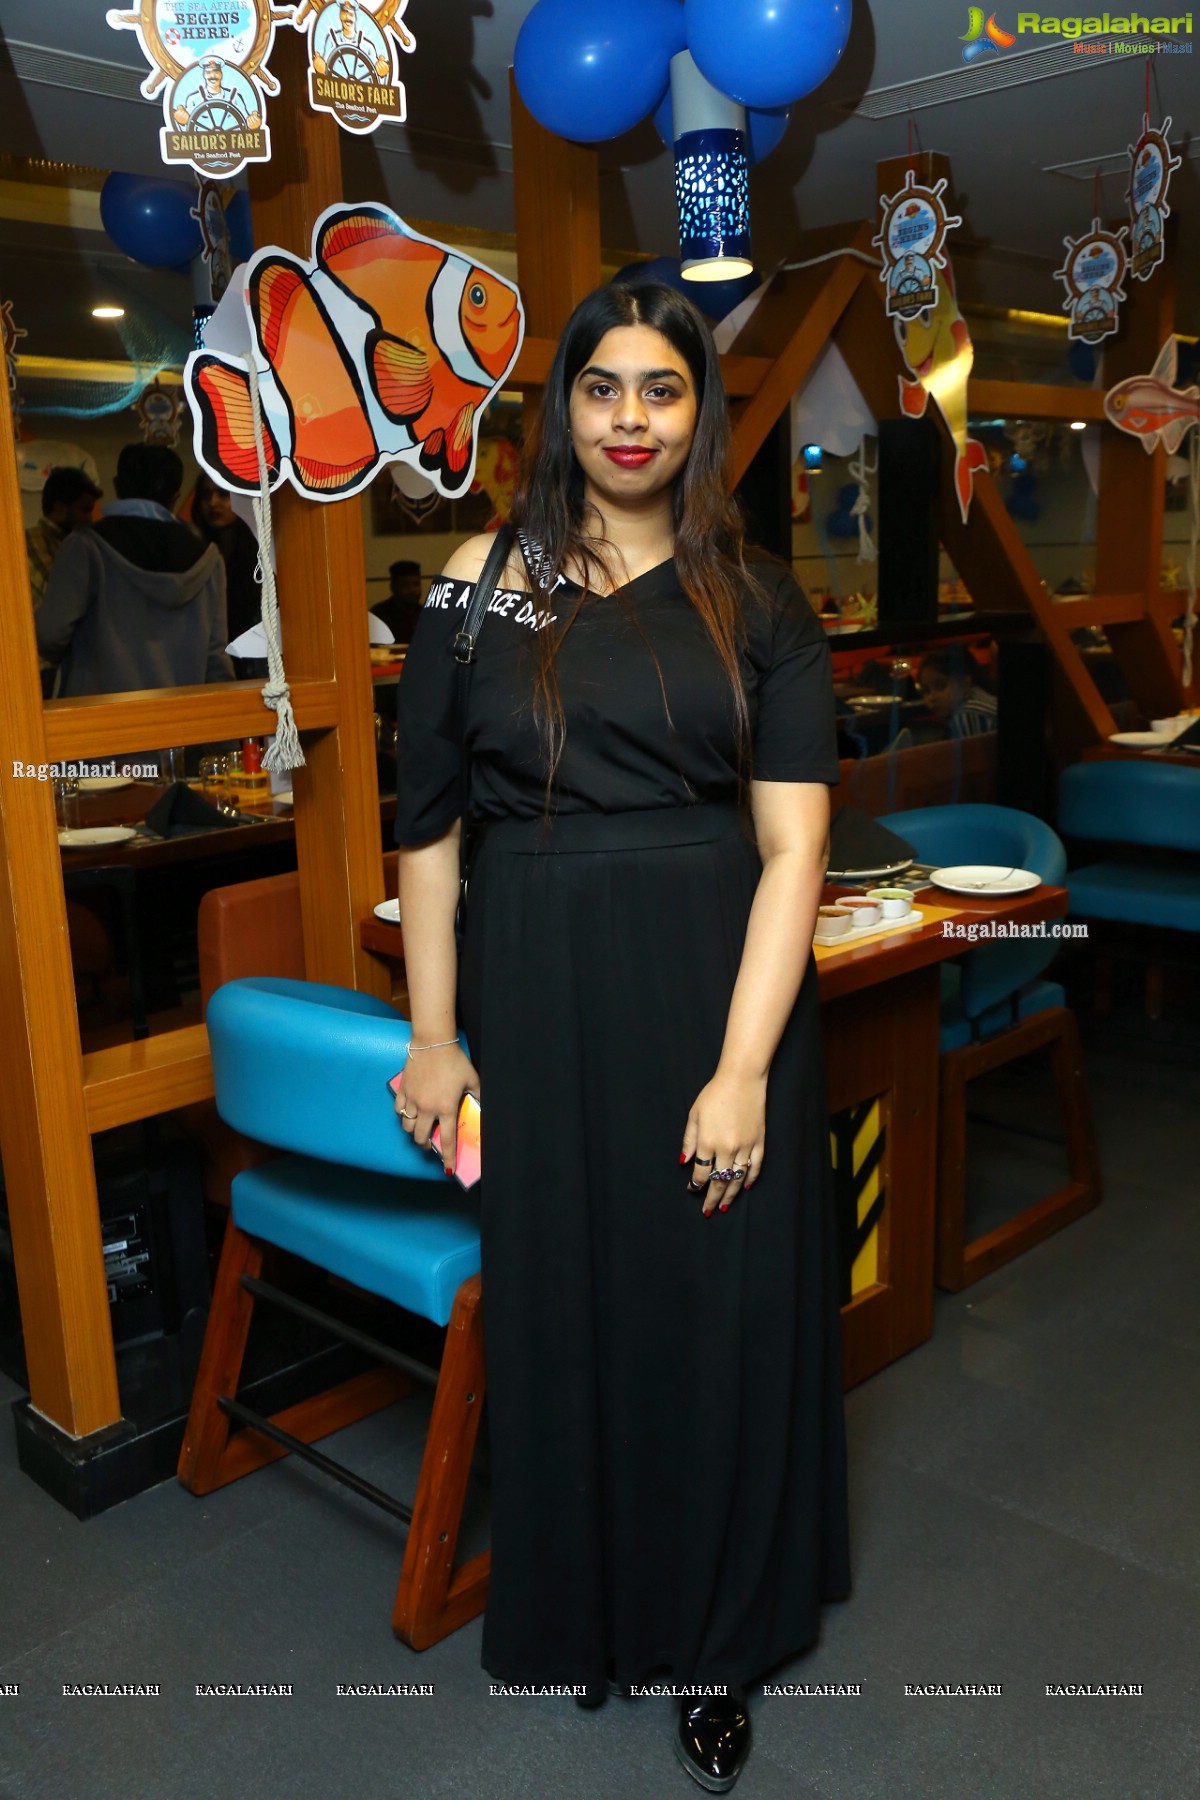 AB's(Absolute Barbecues) Launches Sea Food Festival 'Sailor Fare' at Miyapur Branch 